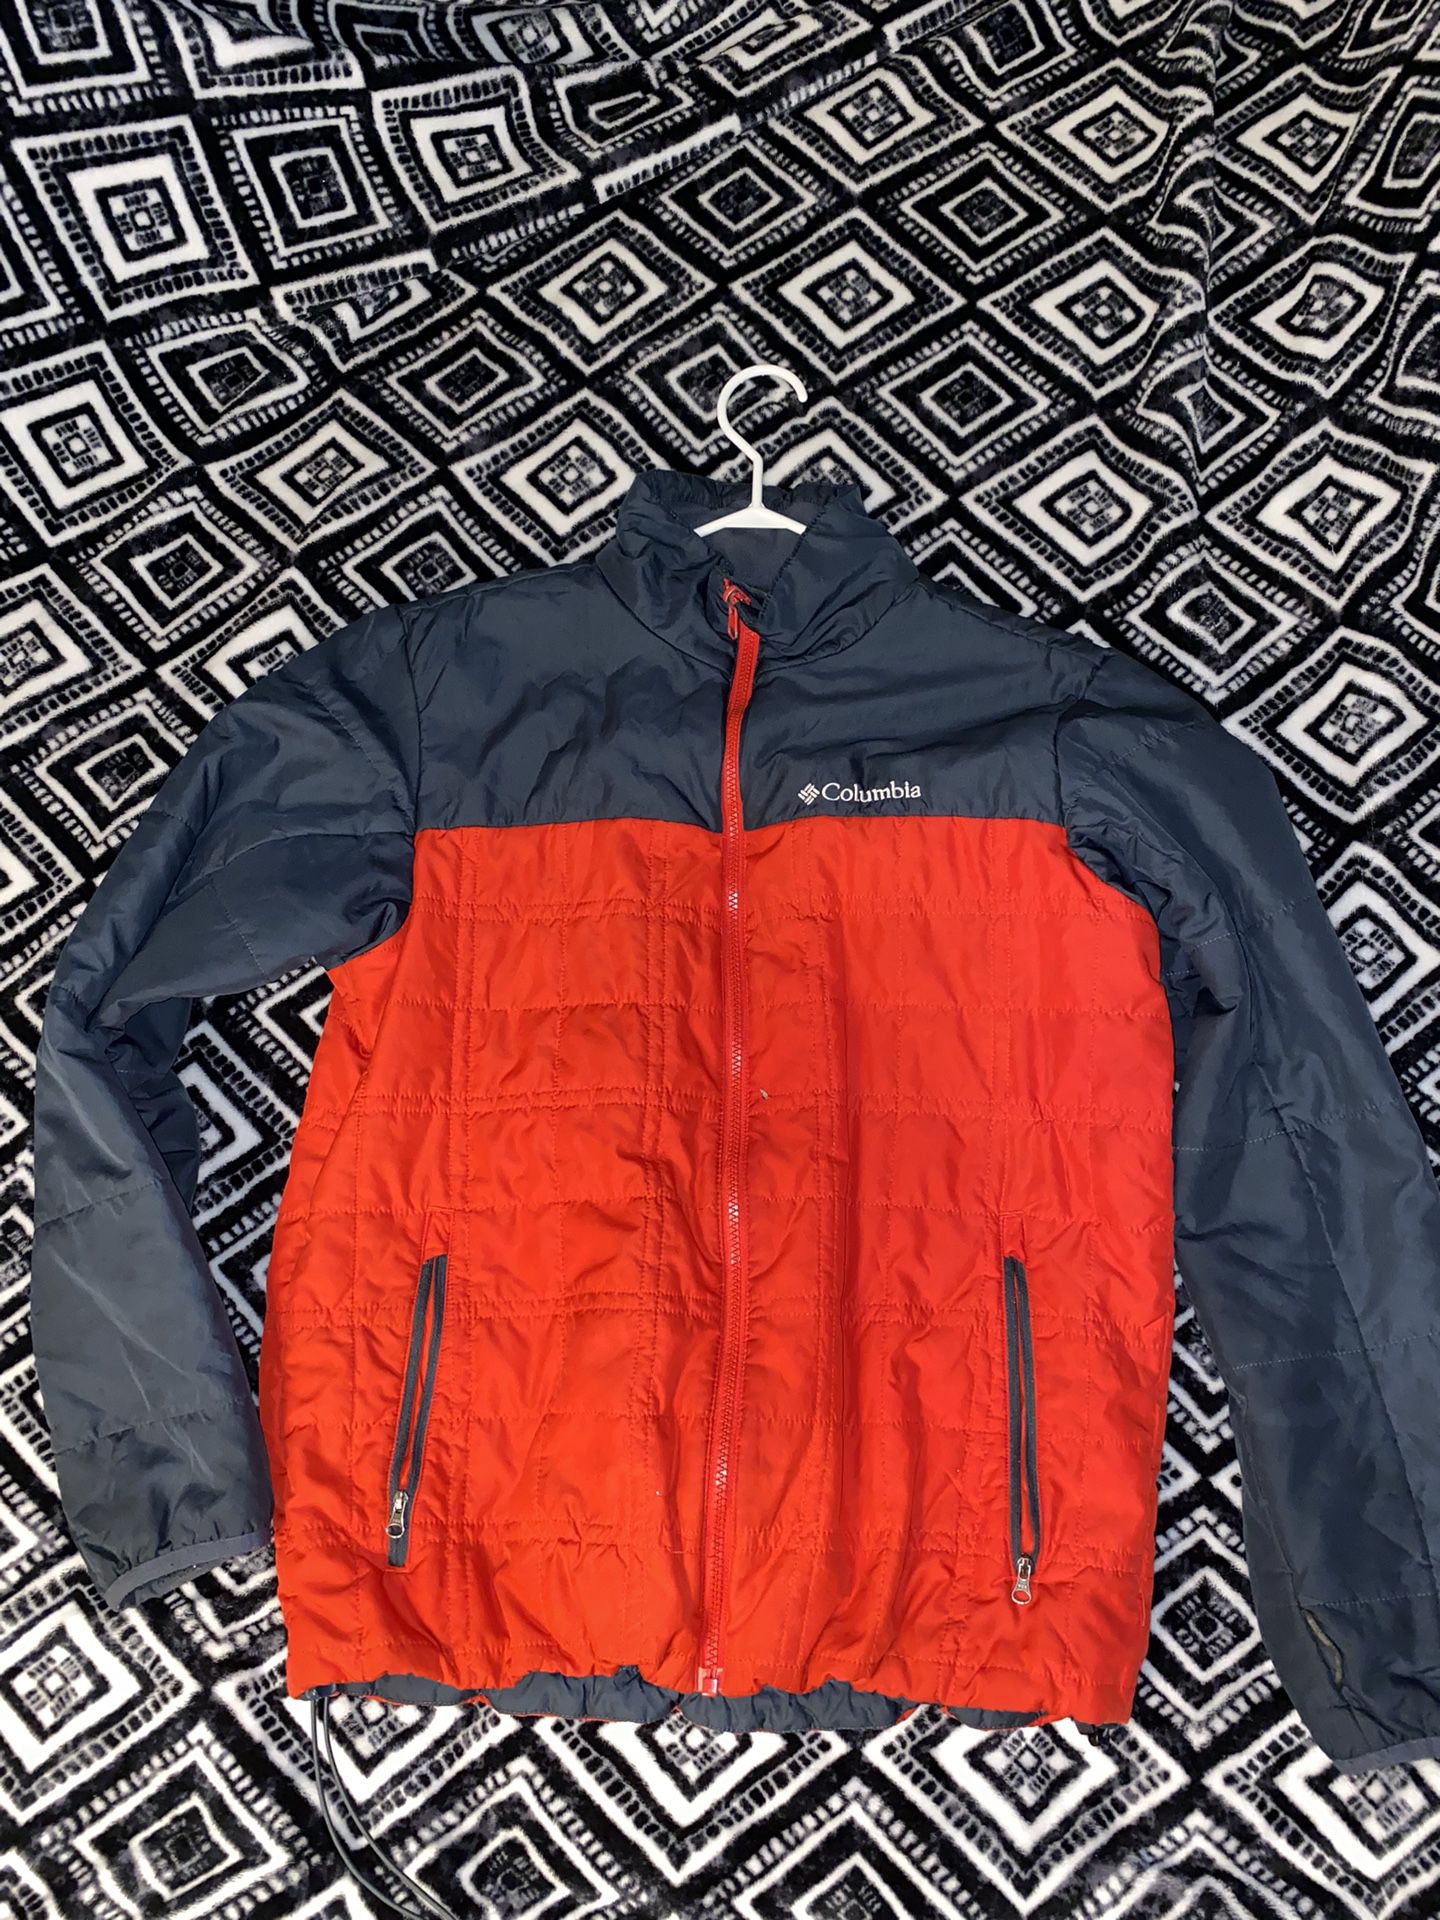 Colombia jacket